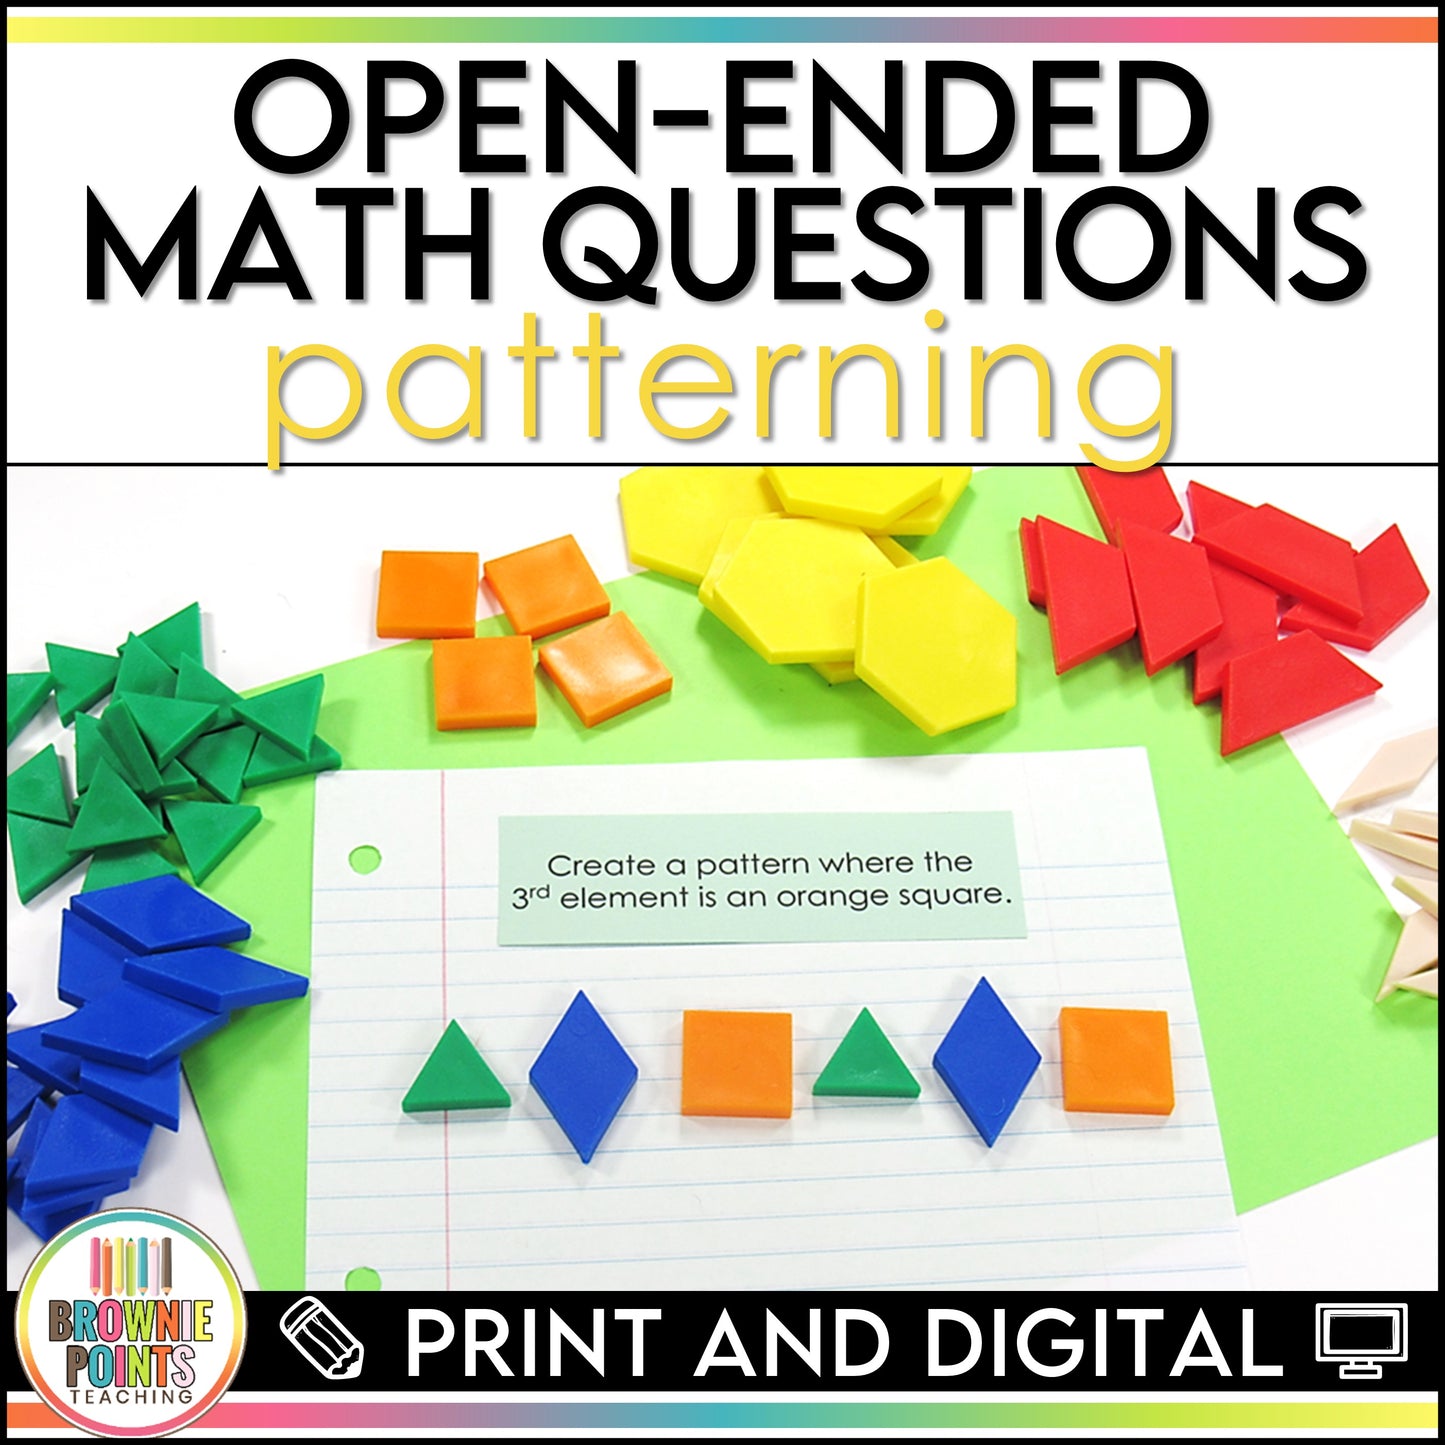 Open-Ended Math Questions - Patterning